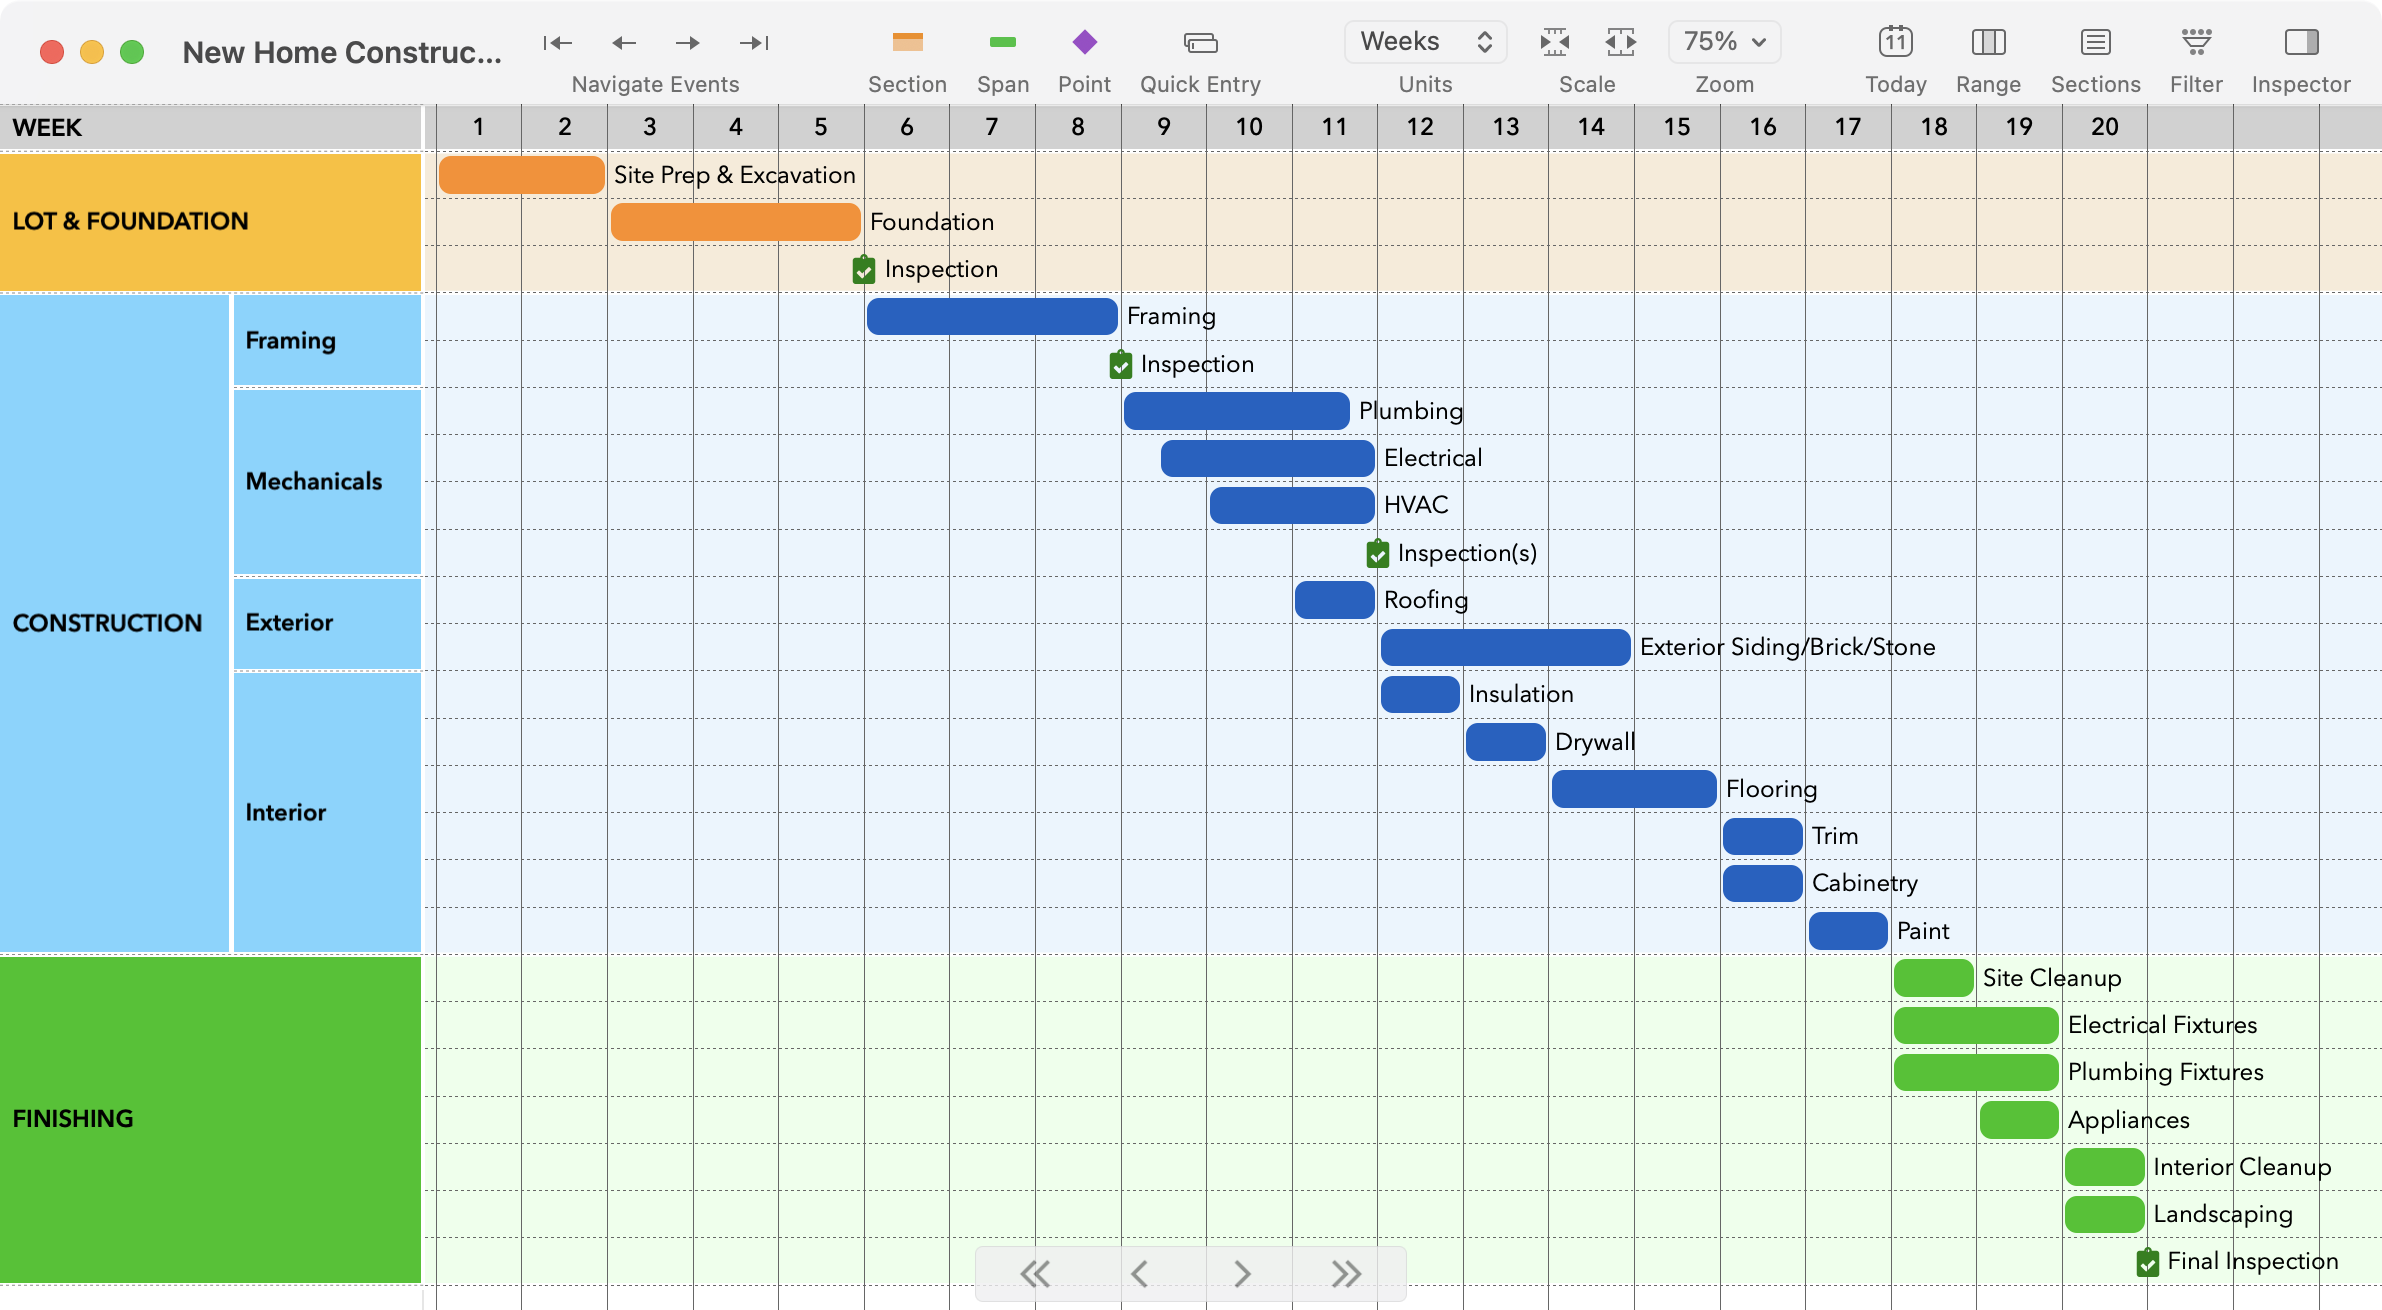 A sample timeline with sections and subsections